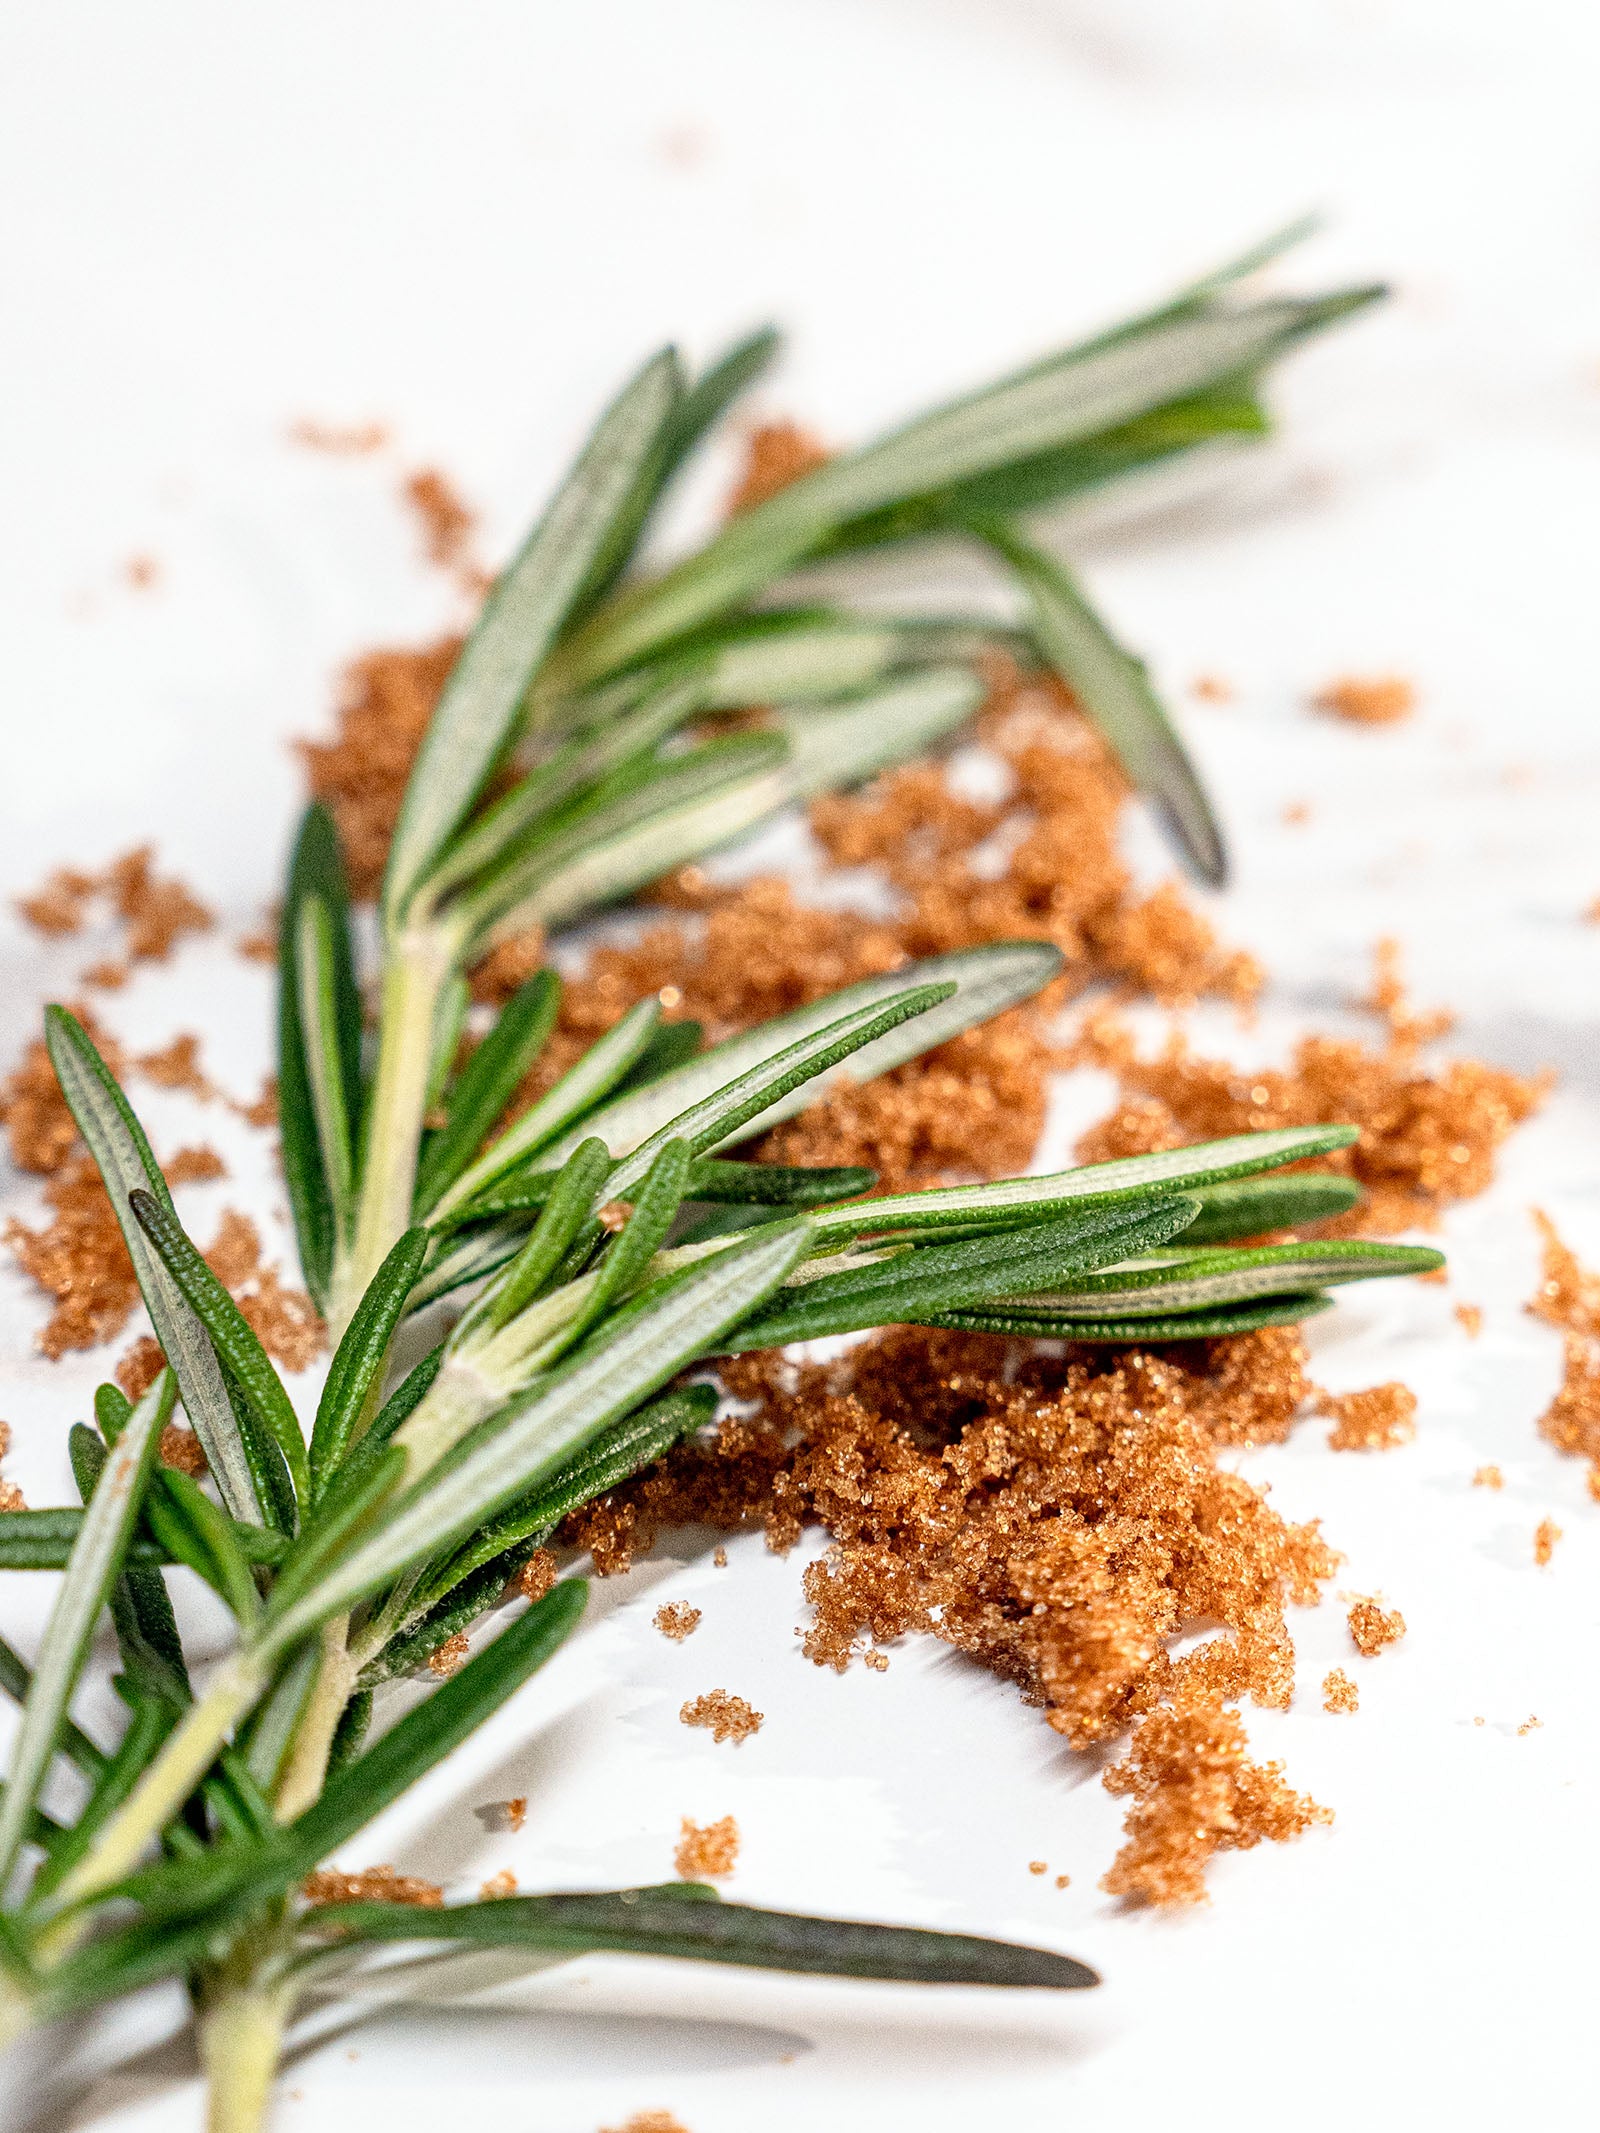 A sprig of rosemary atop a scattering of brown sugar